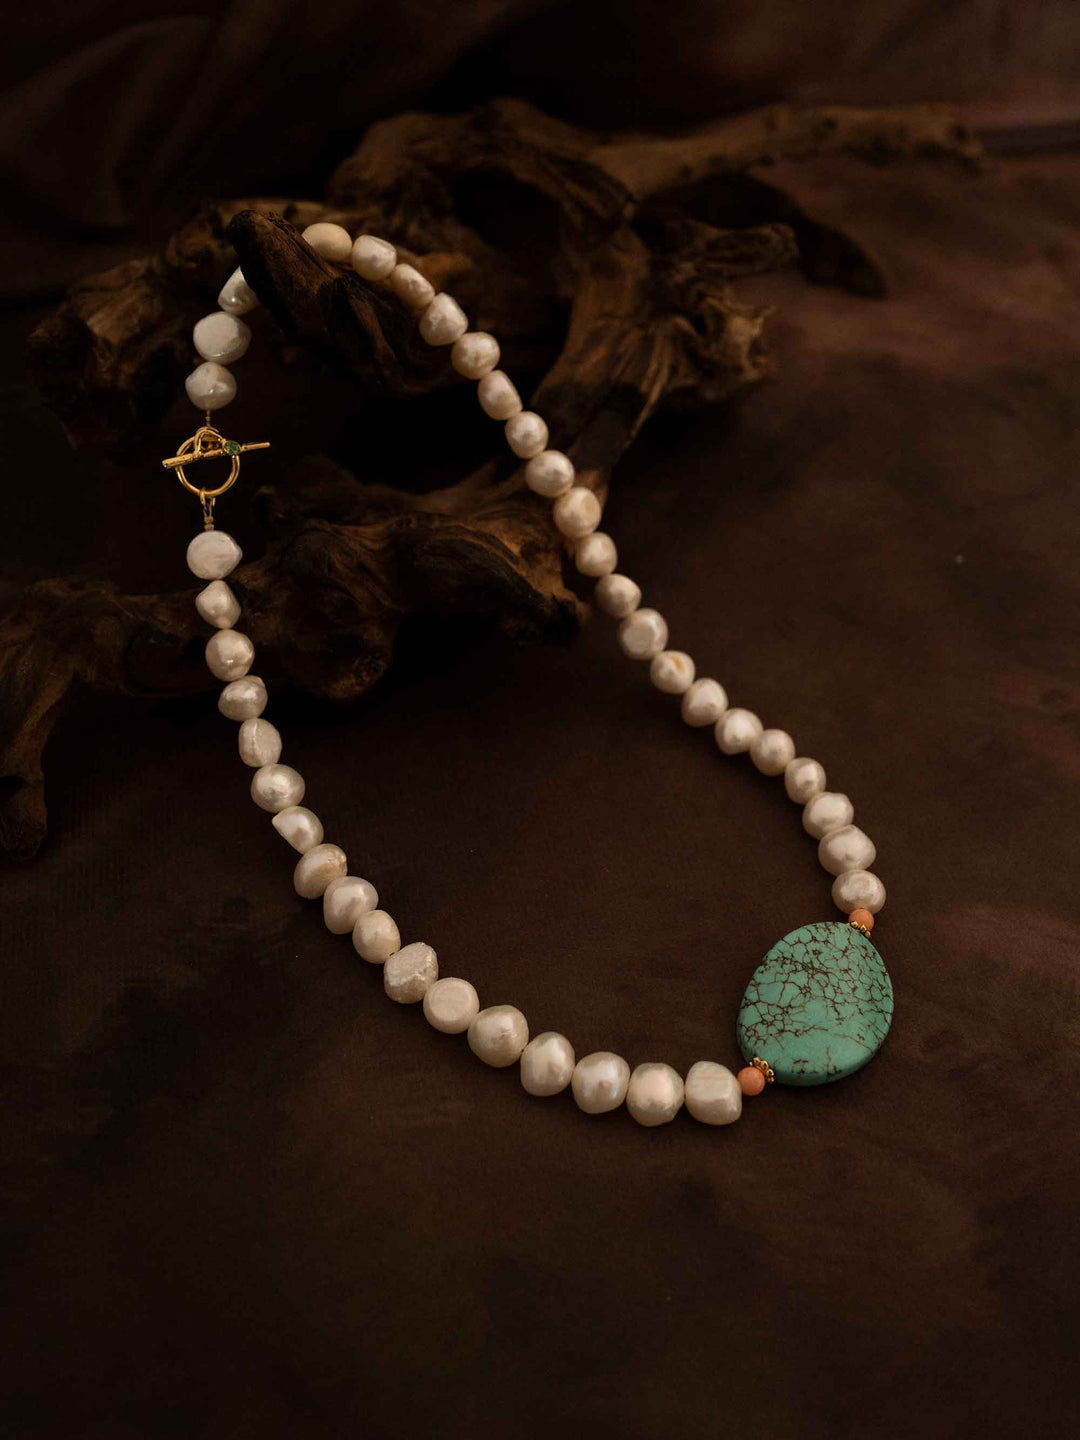 A necklace of natural stones and pearls